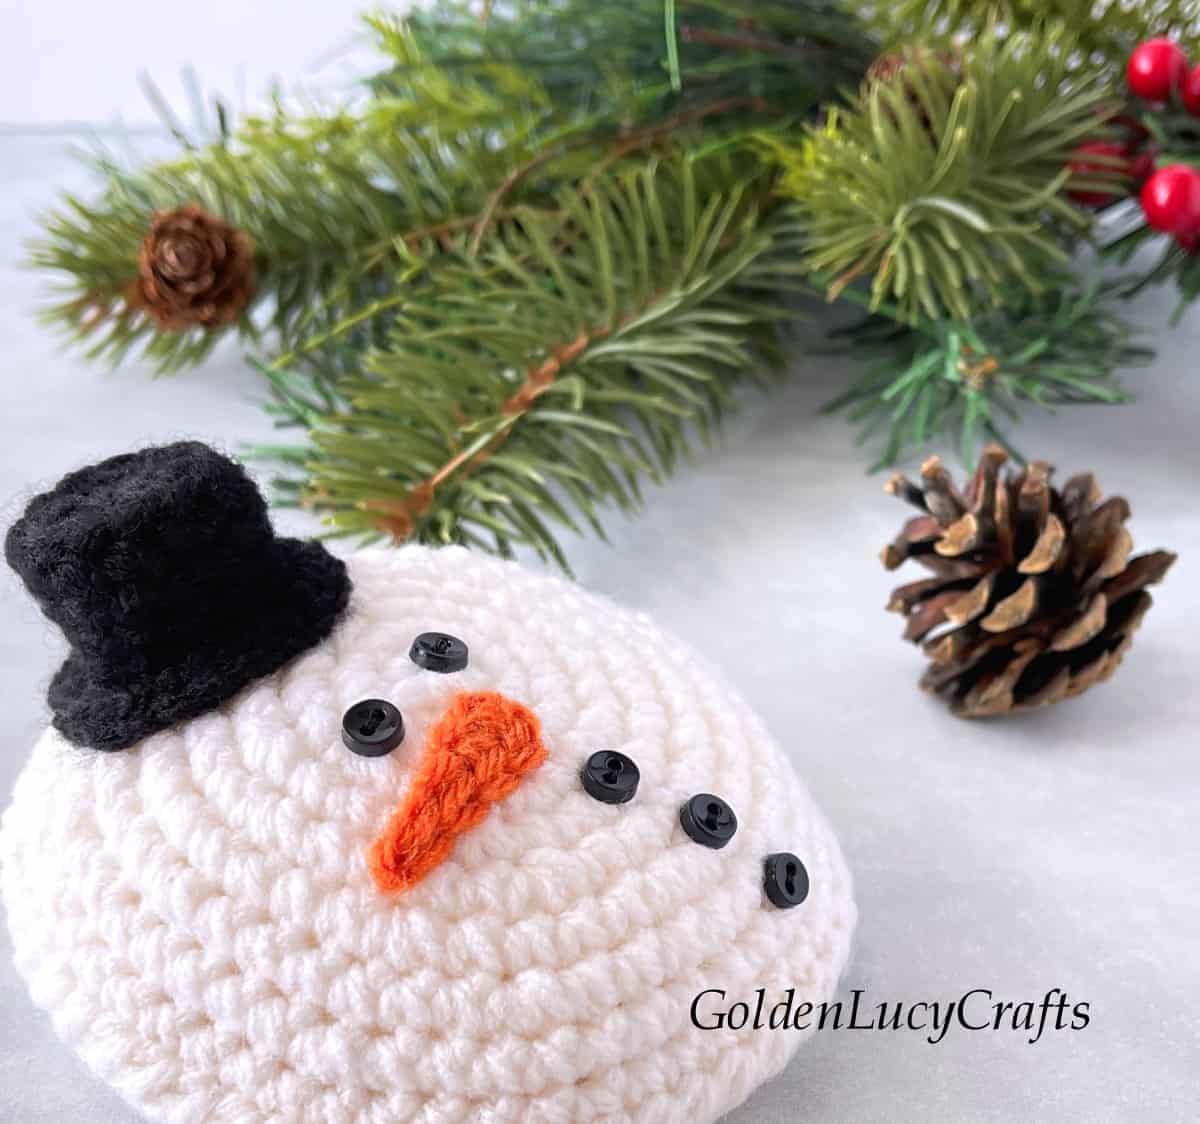 Crochet melted snowman close up picture.